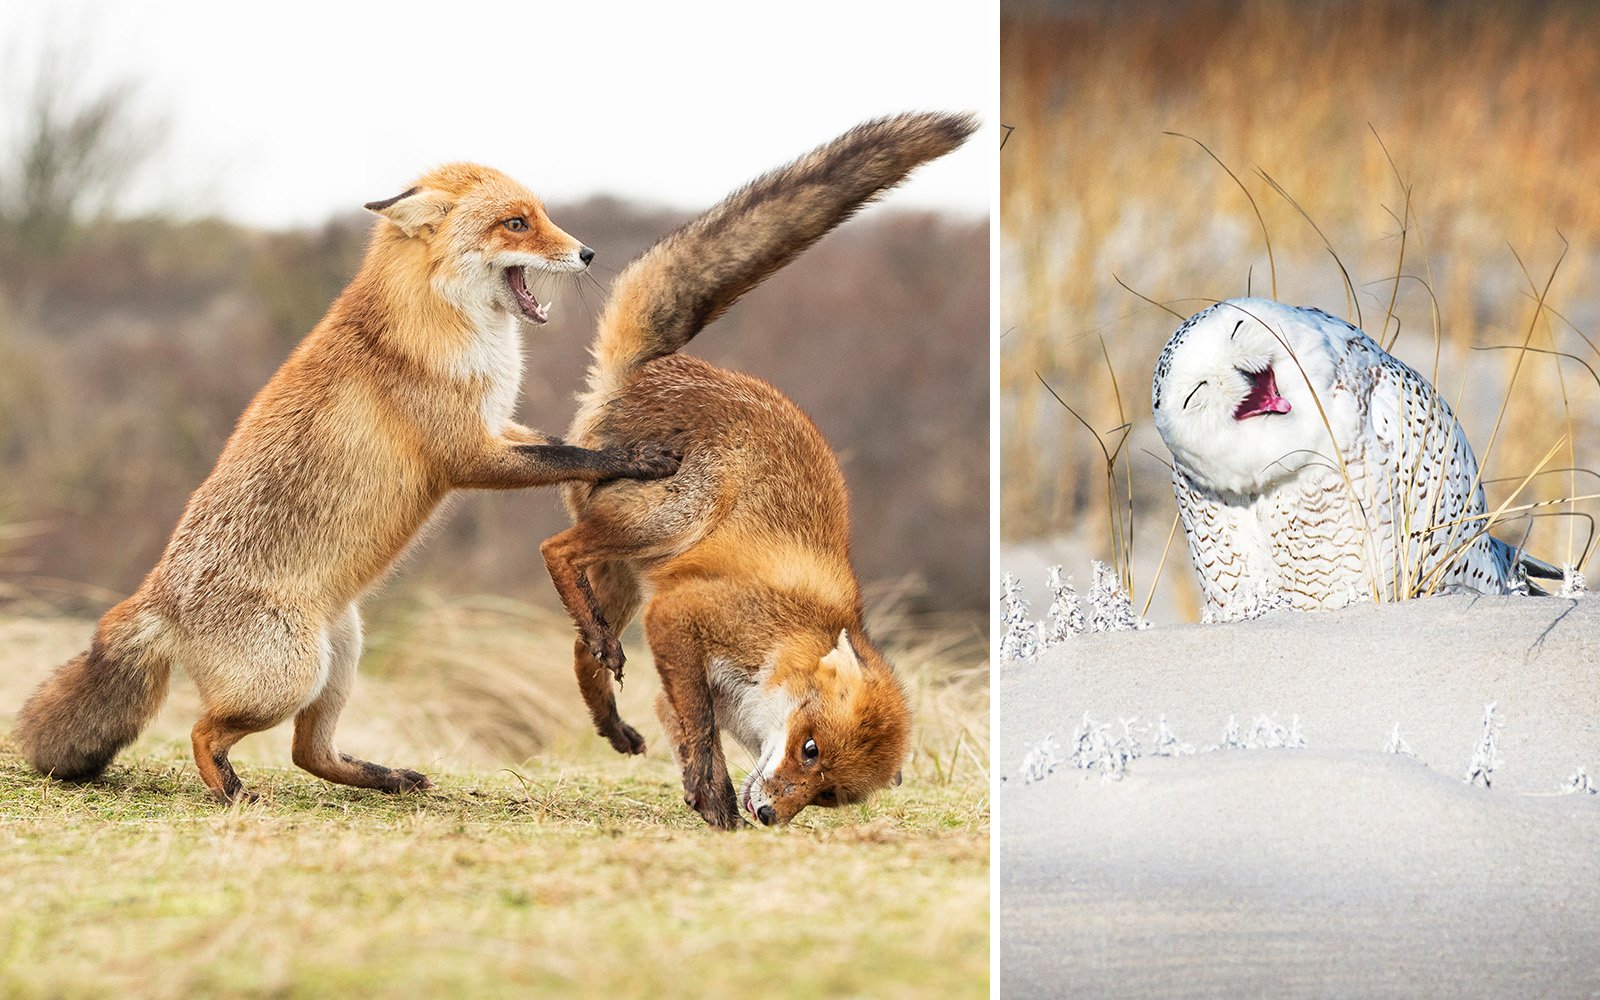 Comedy Wildlife Photography Awards Finalists Prove that Nature Has a Sense of Humor